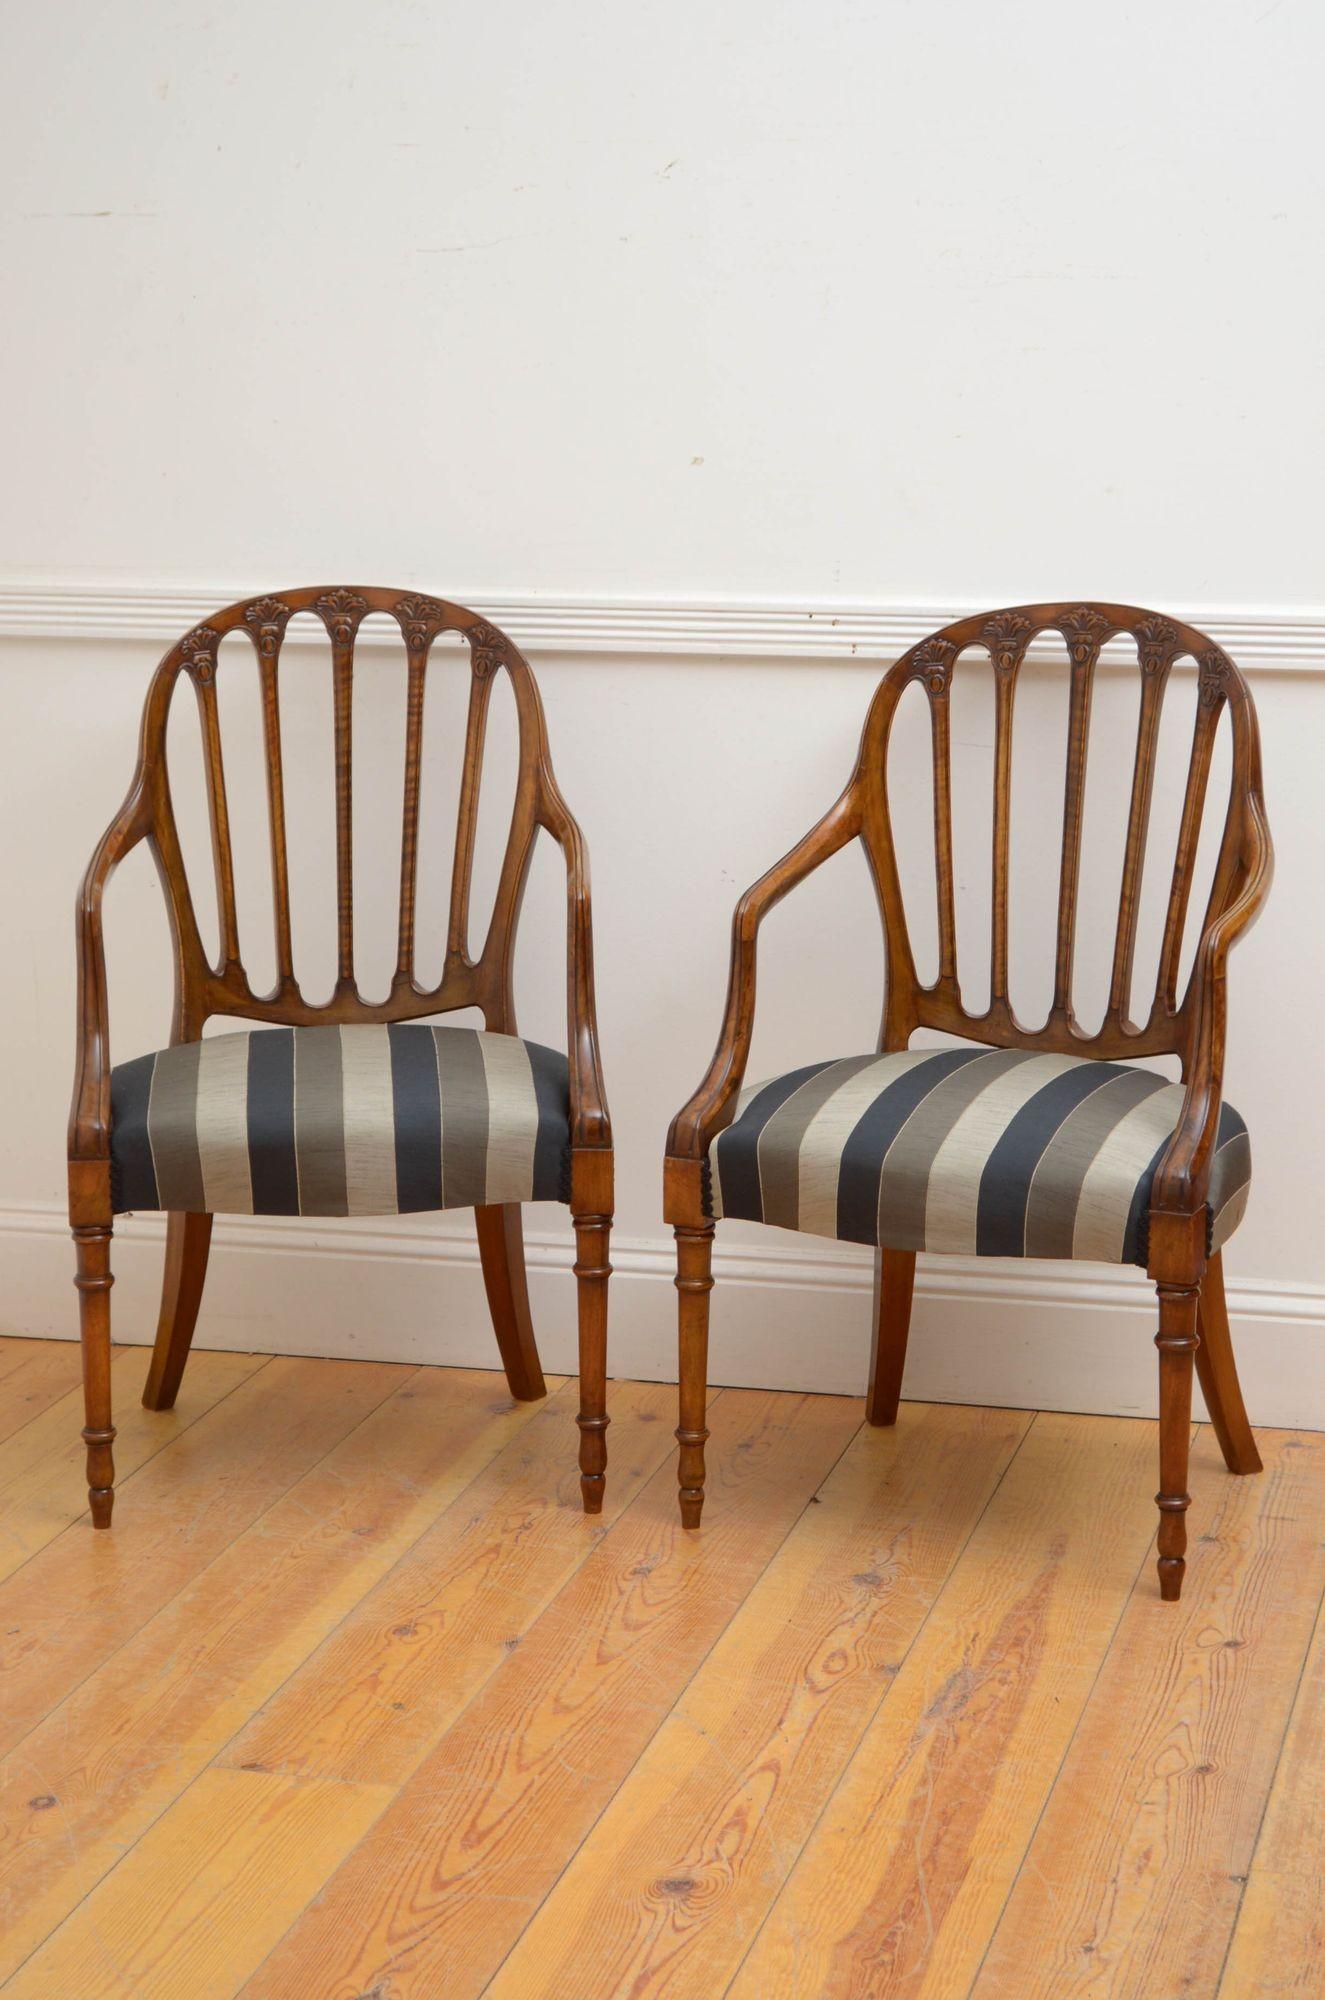 Sn5352 Fine antique elbow chairs in walnut, each having arched top rail with fleur de lis carvings, open arms and generous newly recovered seat, standing on turned and tapered legs. This antique pair of chairs retains its original finish which has